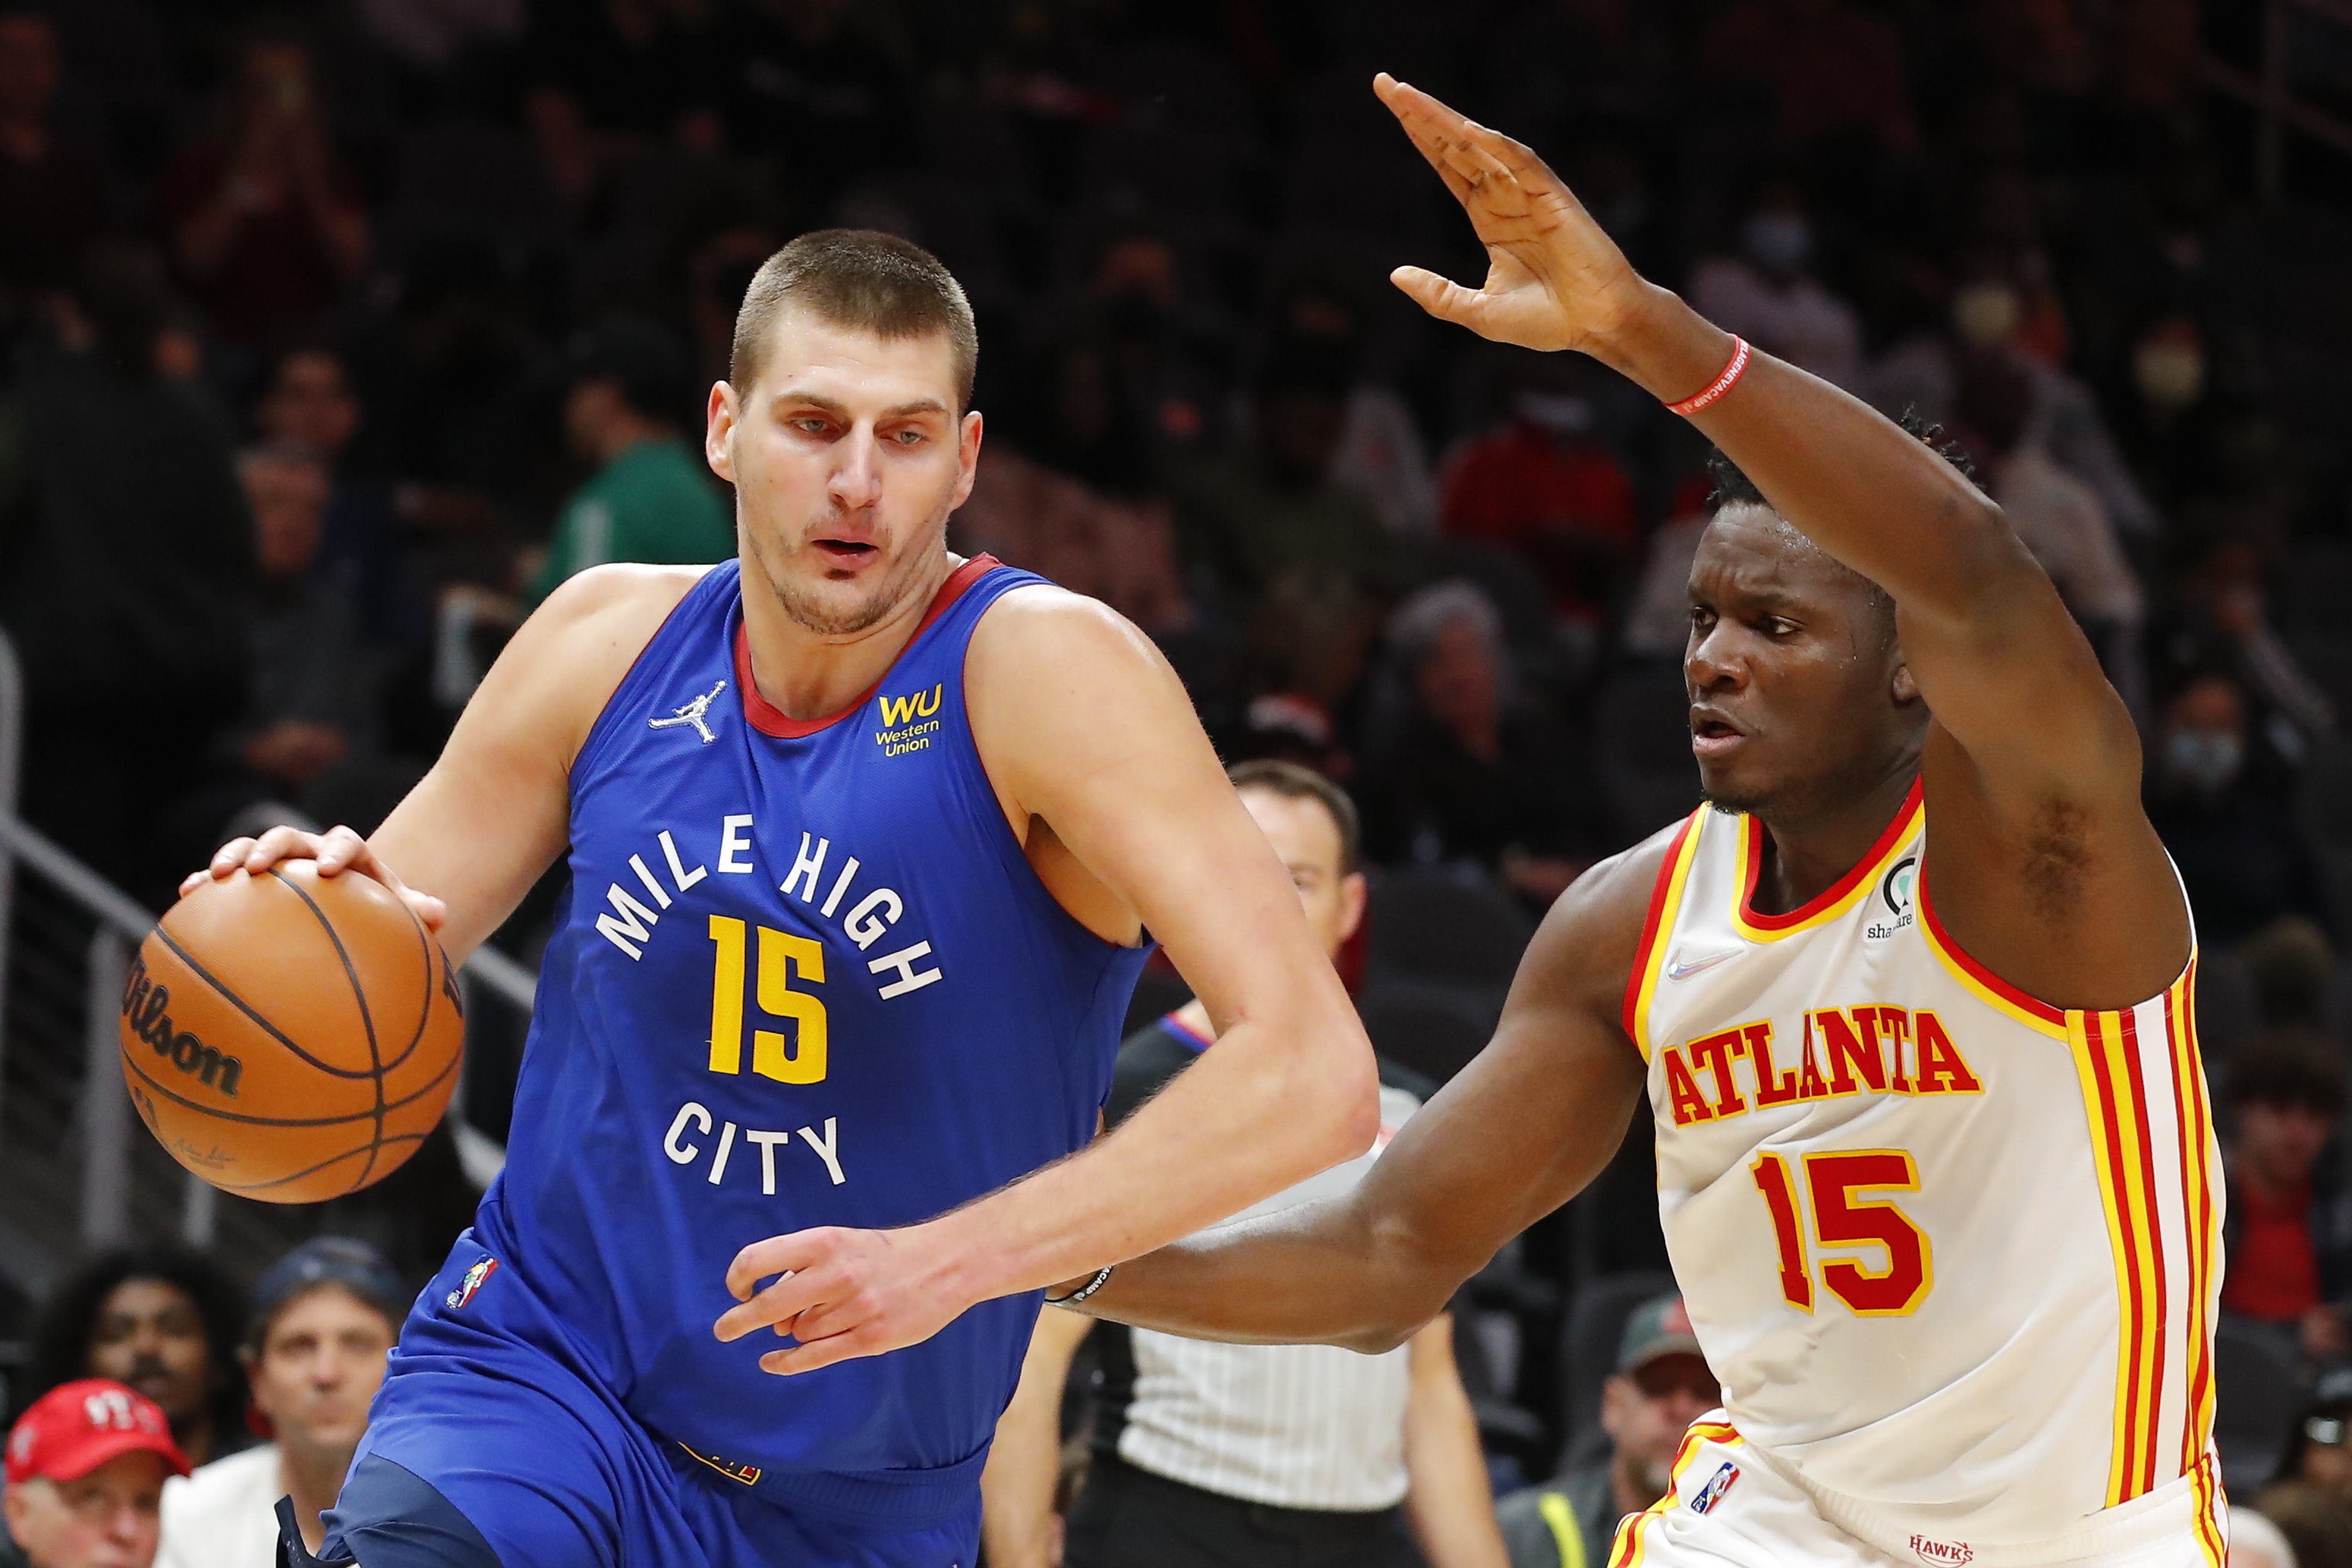 Nikola Jokic #15 of the Denver Nuggets drives tot he basket against Clint Capela #15 of the Atlanta Hawks during the first half at State Farm Arena on December 17, 2021 in Atlanta, Georgia.